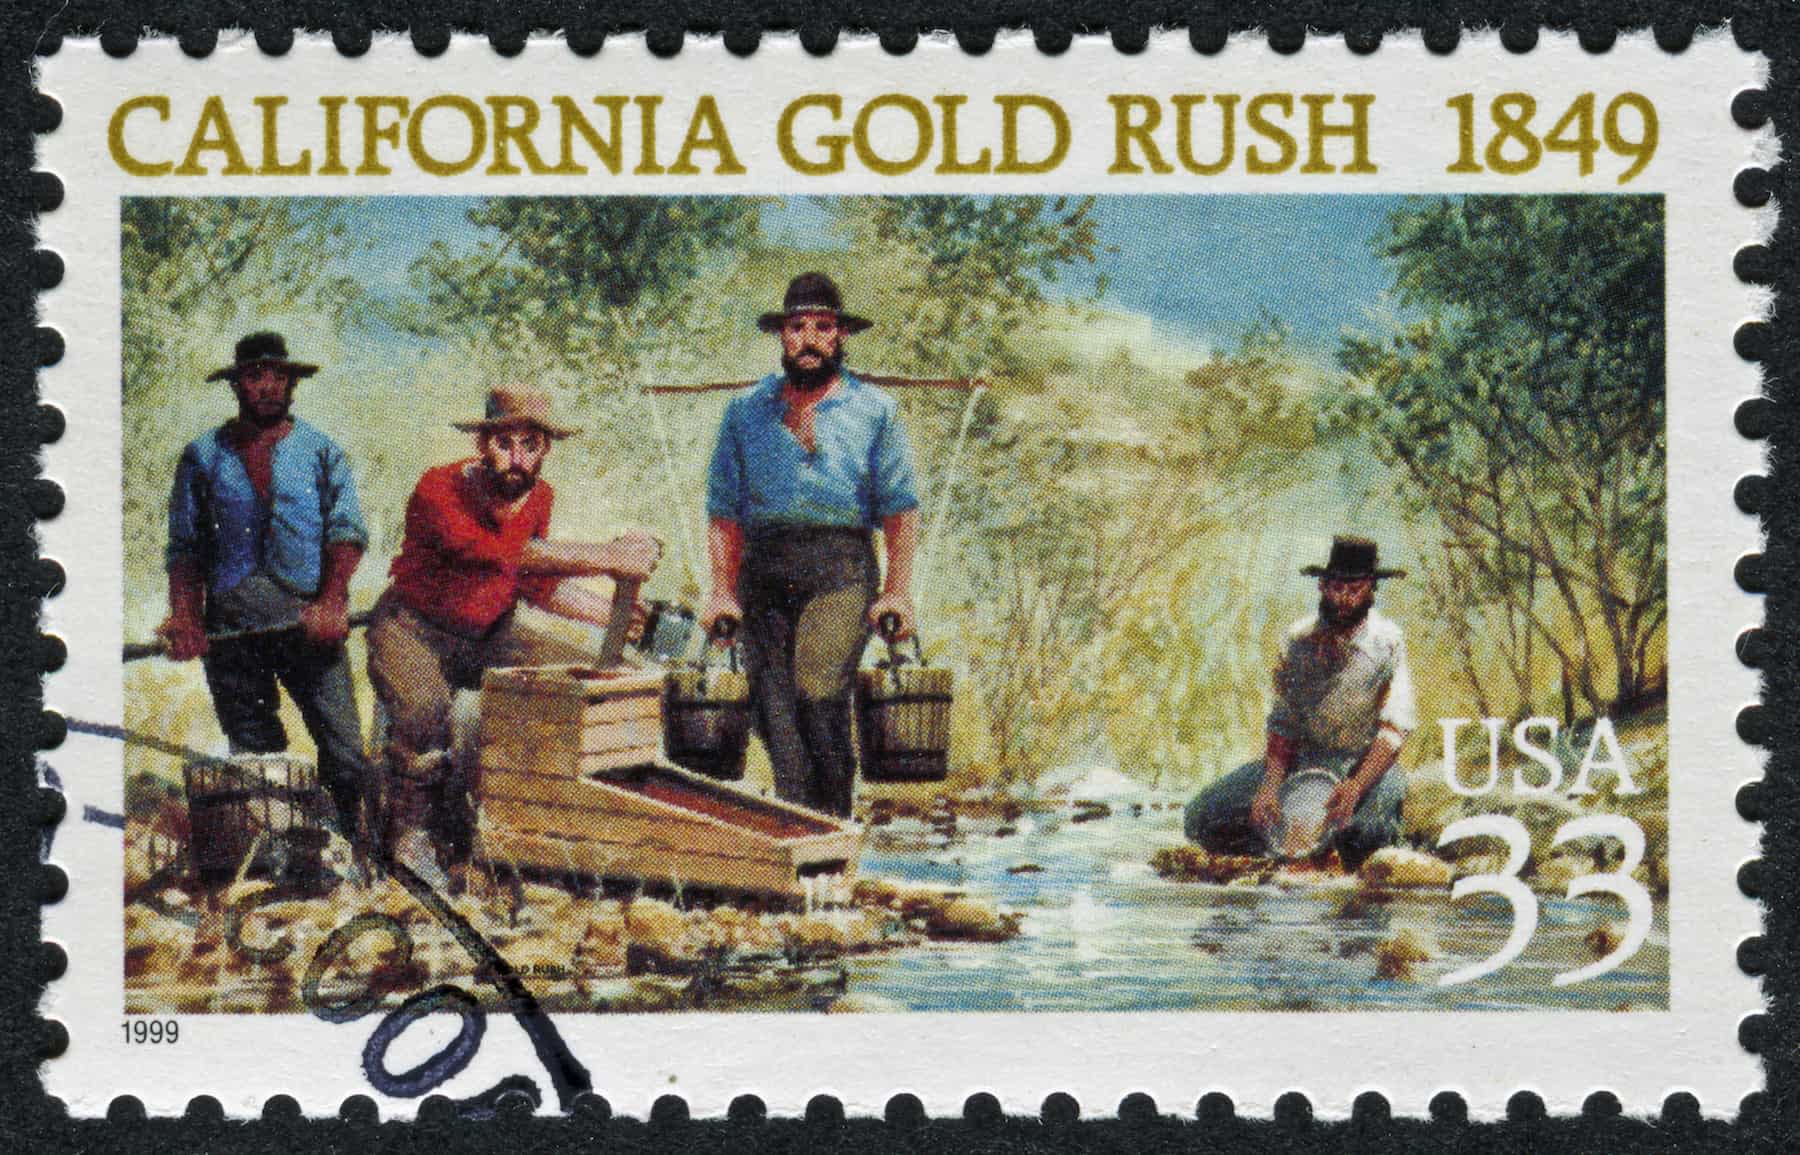 Miners vs. Merchants: How Global Trade Made Men Wealthy during the California Gold Rush